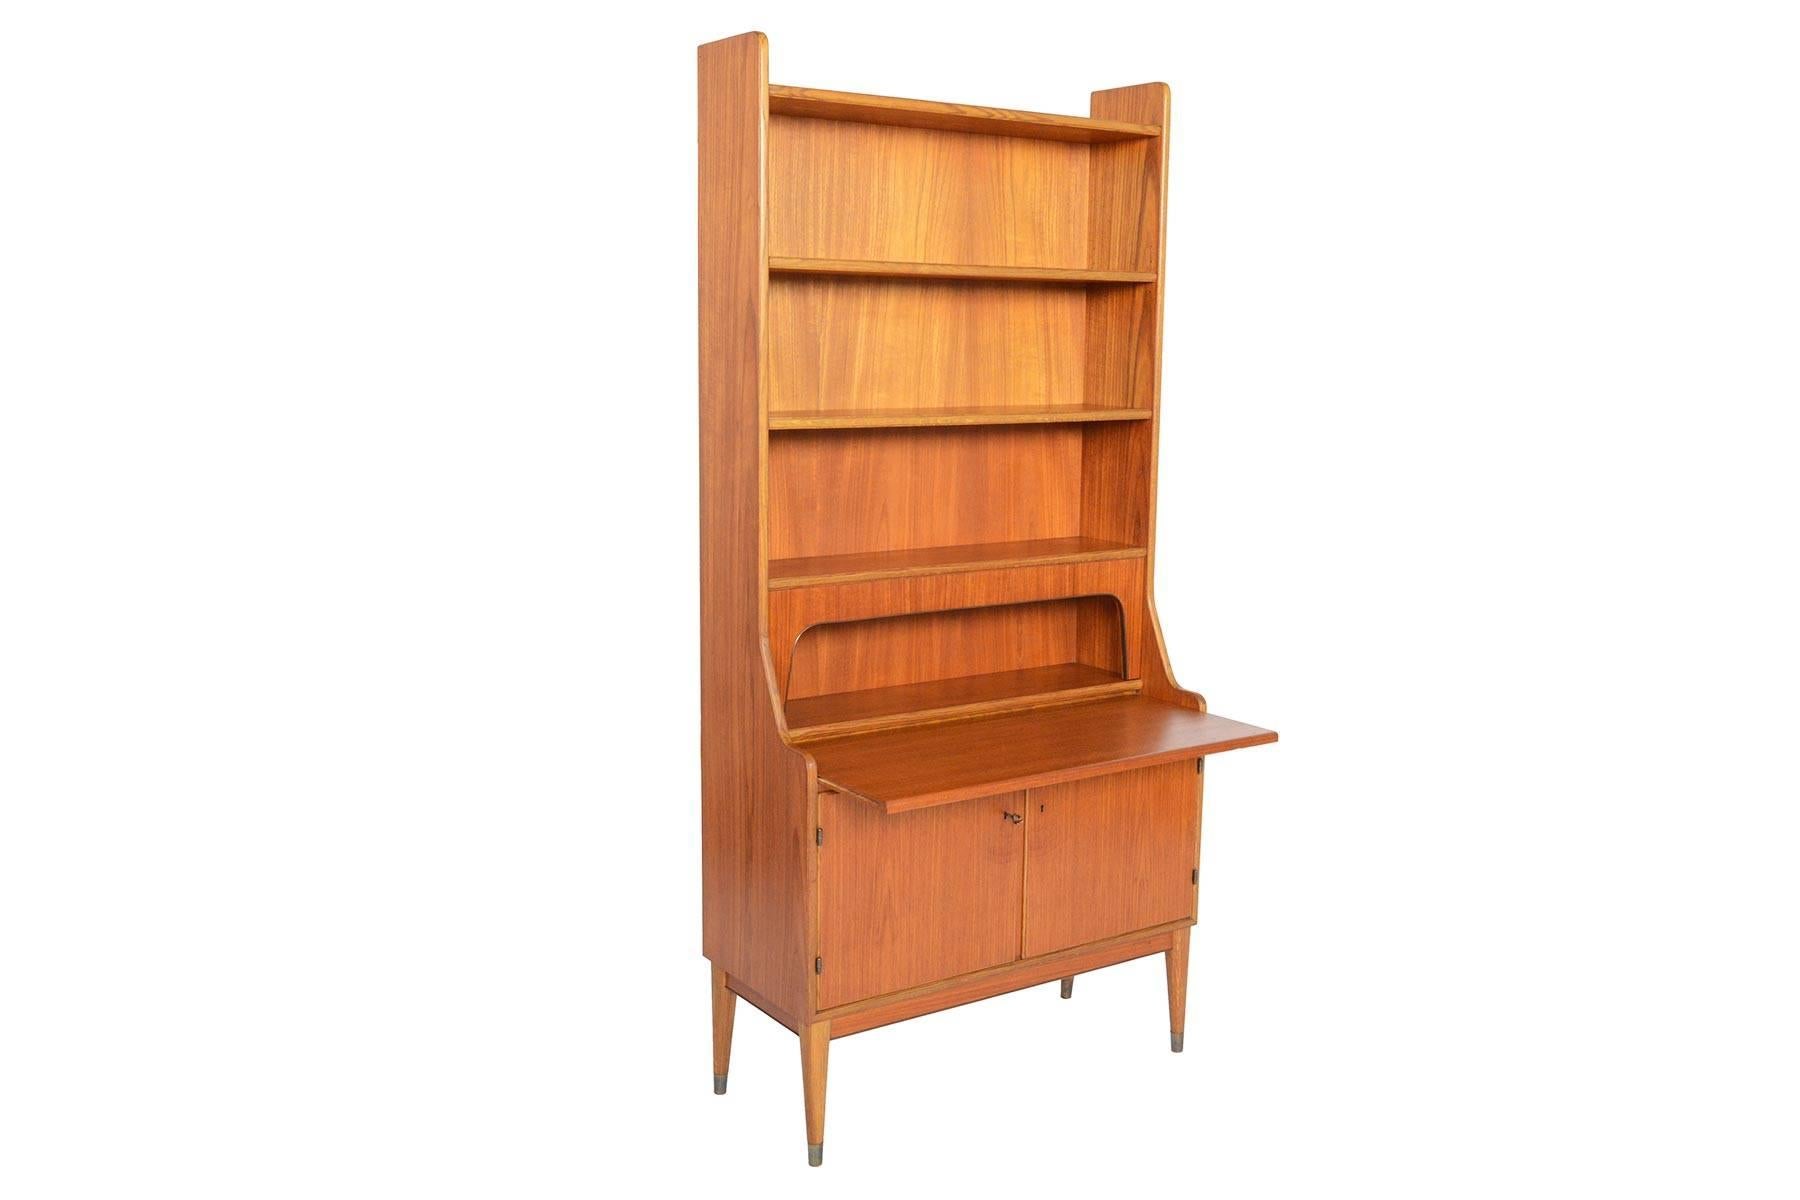 This Danish modern teak and oak bookcase with secretary desk is a wonderfully versatile storage piece! Crafted in teak, this bookcase is accented with oak along the sides and shelves. The bookcase top offers two adjustable shelves. A pull- out desk